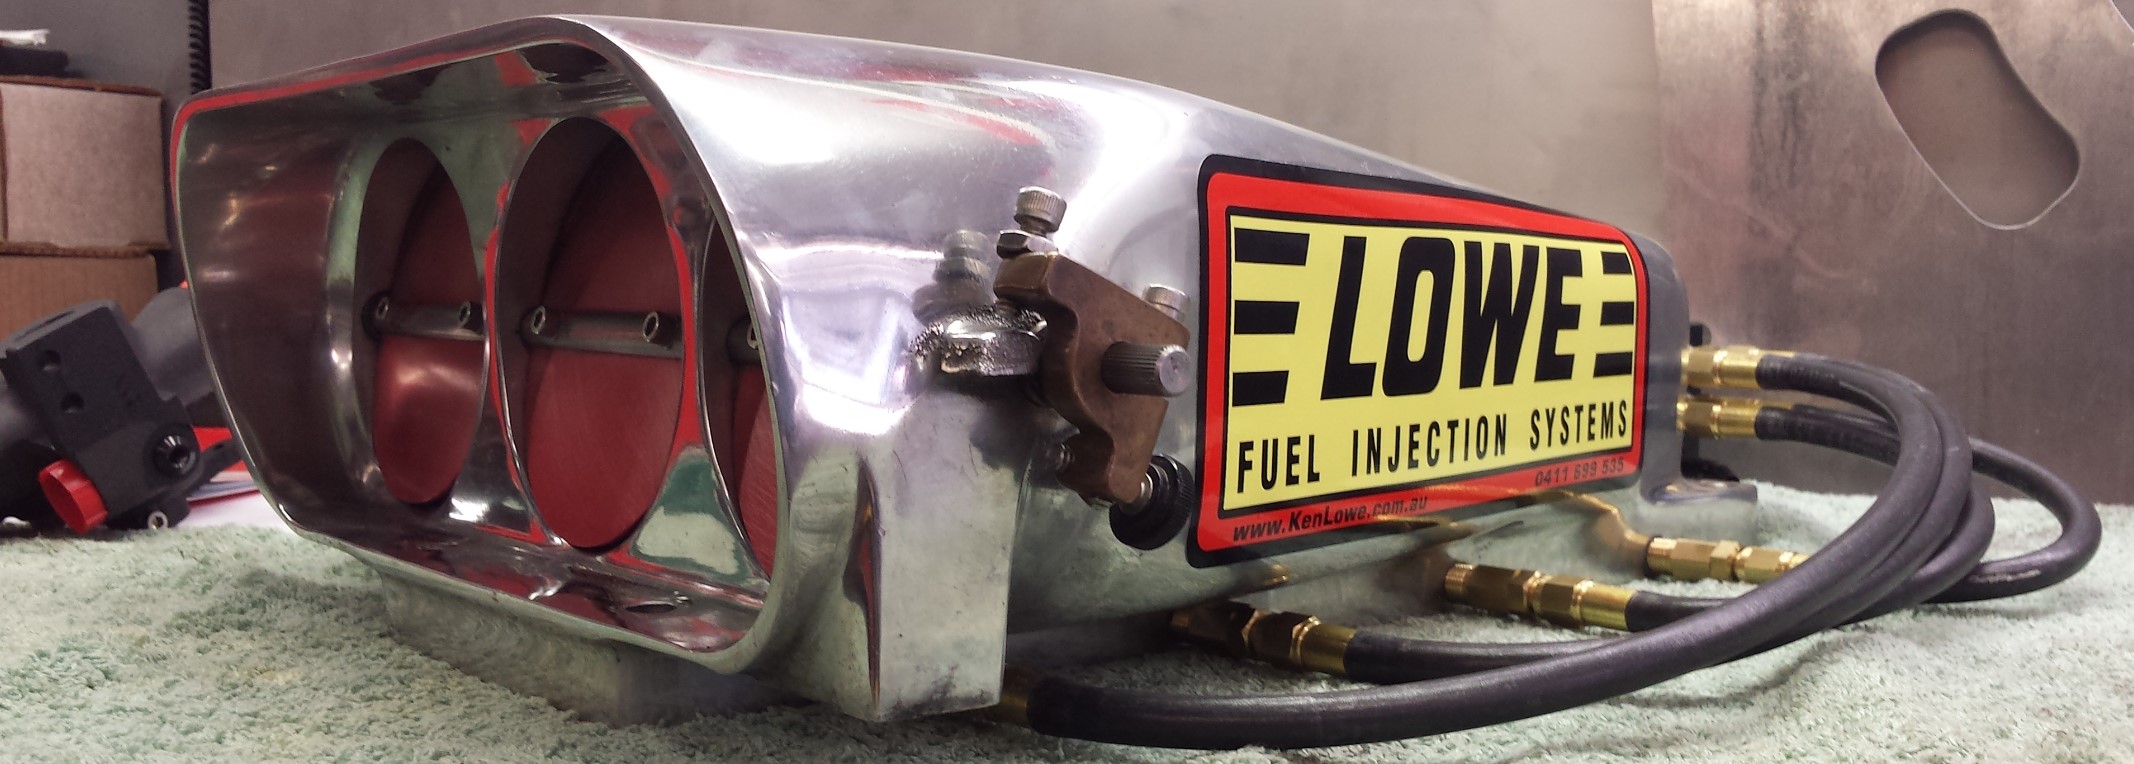 LOWE Fuel Systems - Bug Hat